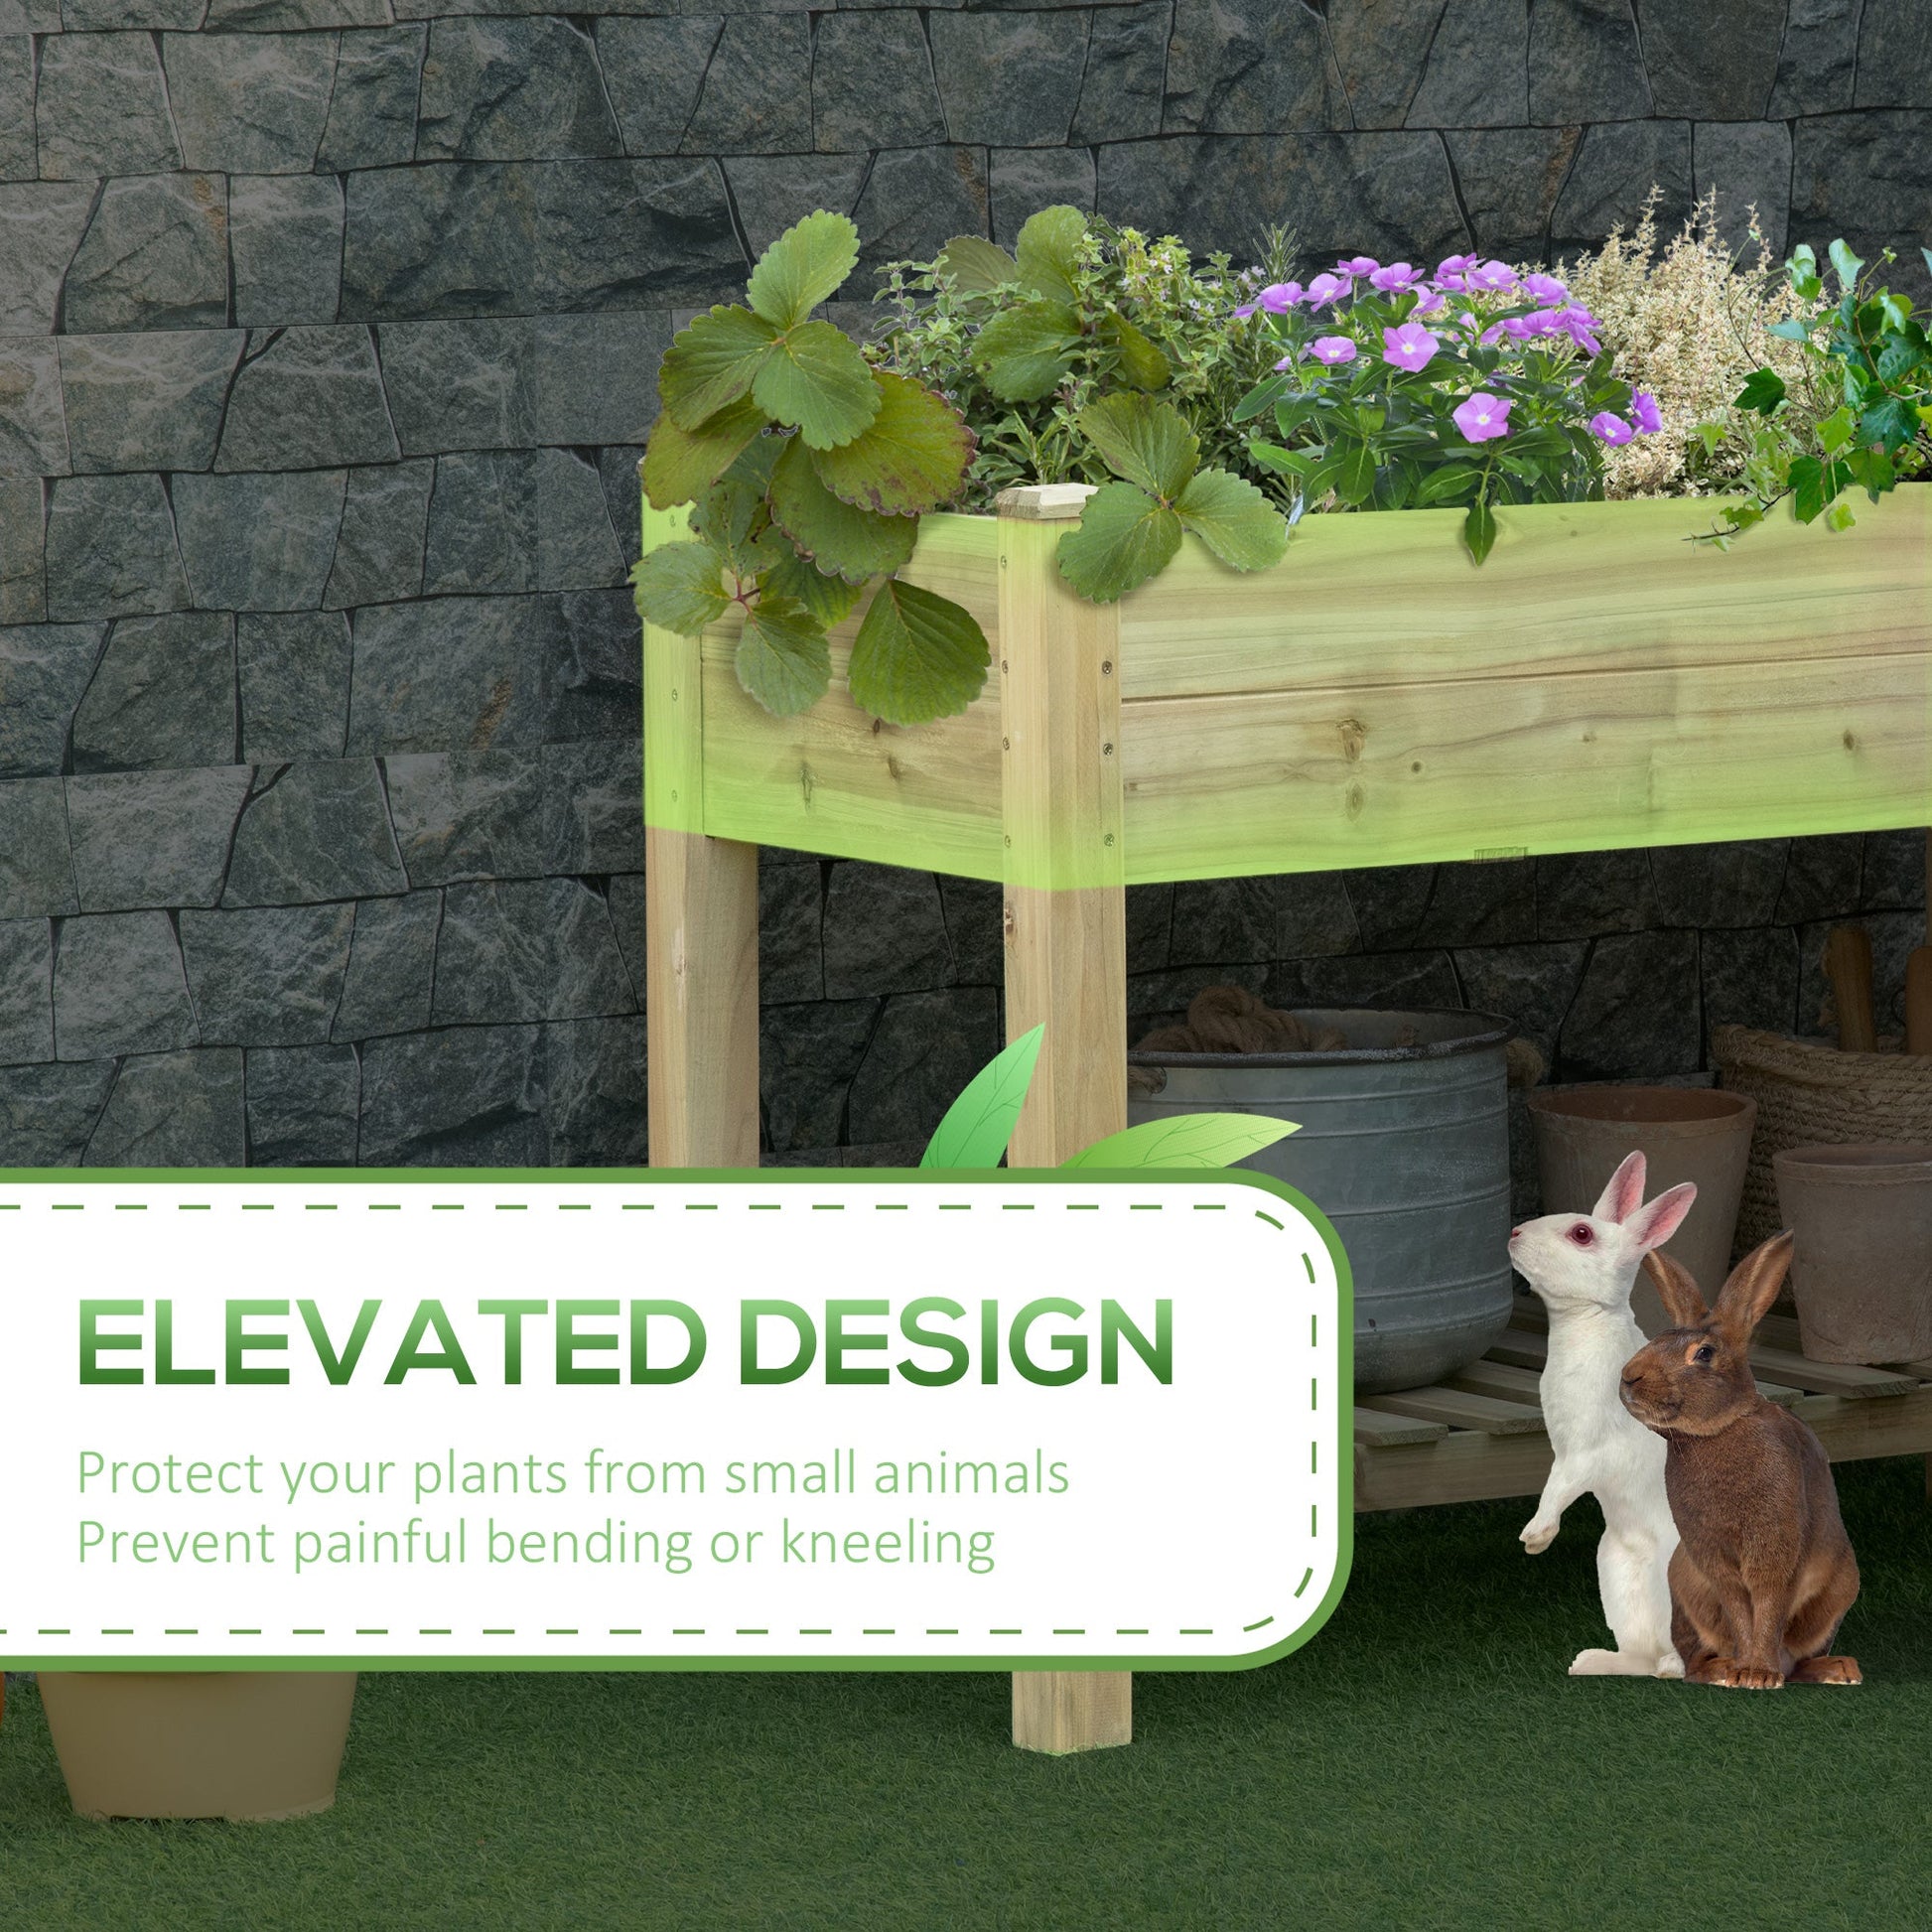 45" x 22" x 33" Elevated Planter Box with Legs and Storage Shelf, Raised Garden Bed, Elevated Wooden Planter Box, Gardening Standing Growing Bed for Backyard, Patio, Balcony at Gallery Canada